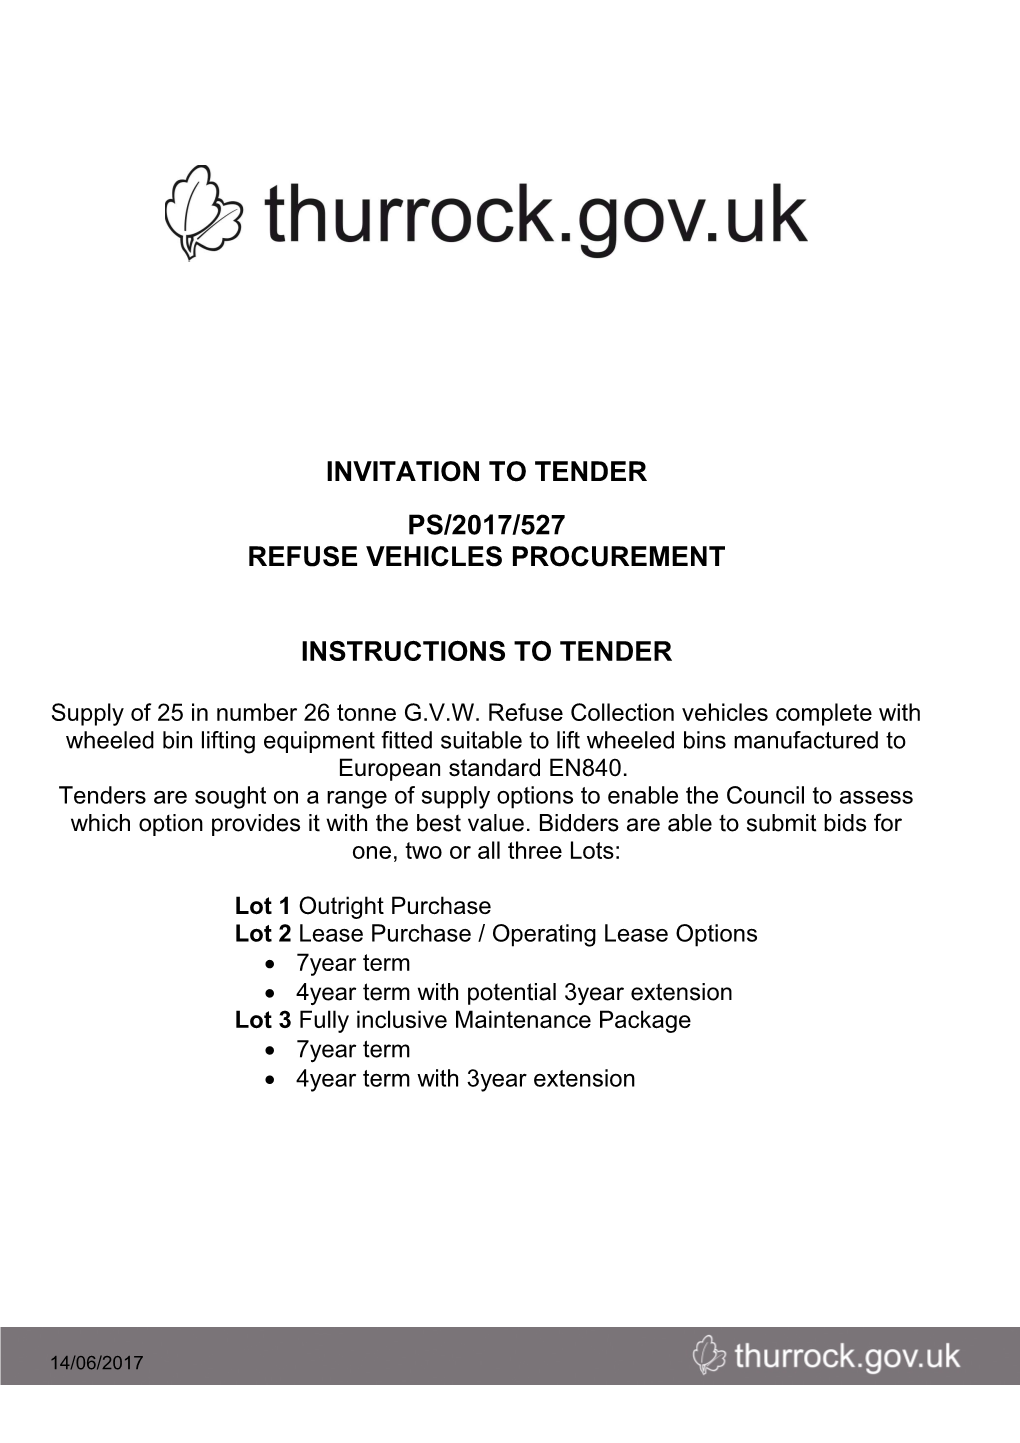 Thurrock Council - Invitation to Tender